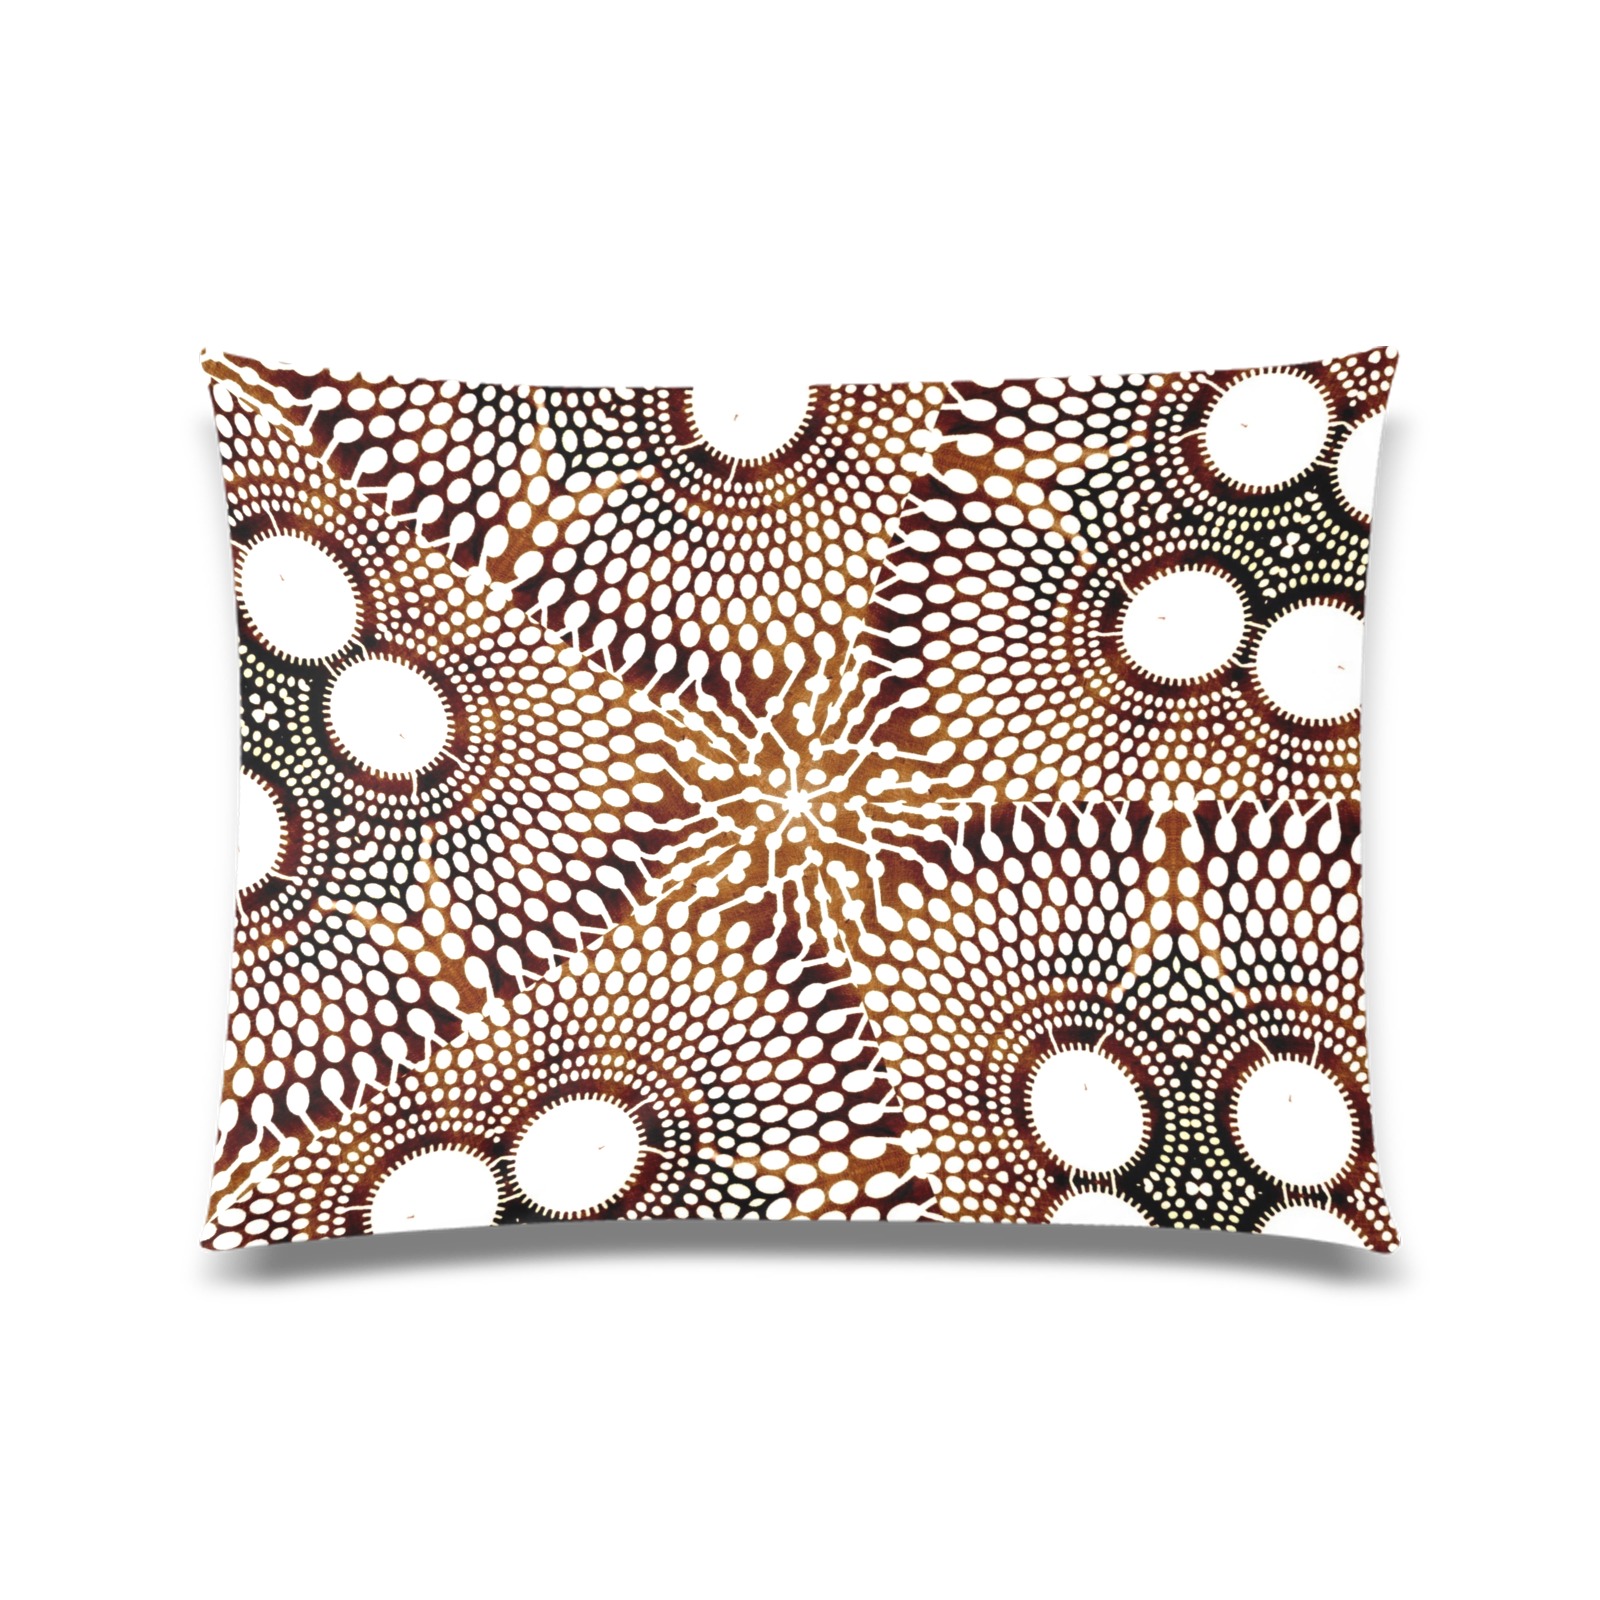 AFRICAN PRINT PATTERN 4 Custom Picture Pillow Case 20"x26" (one side)